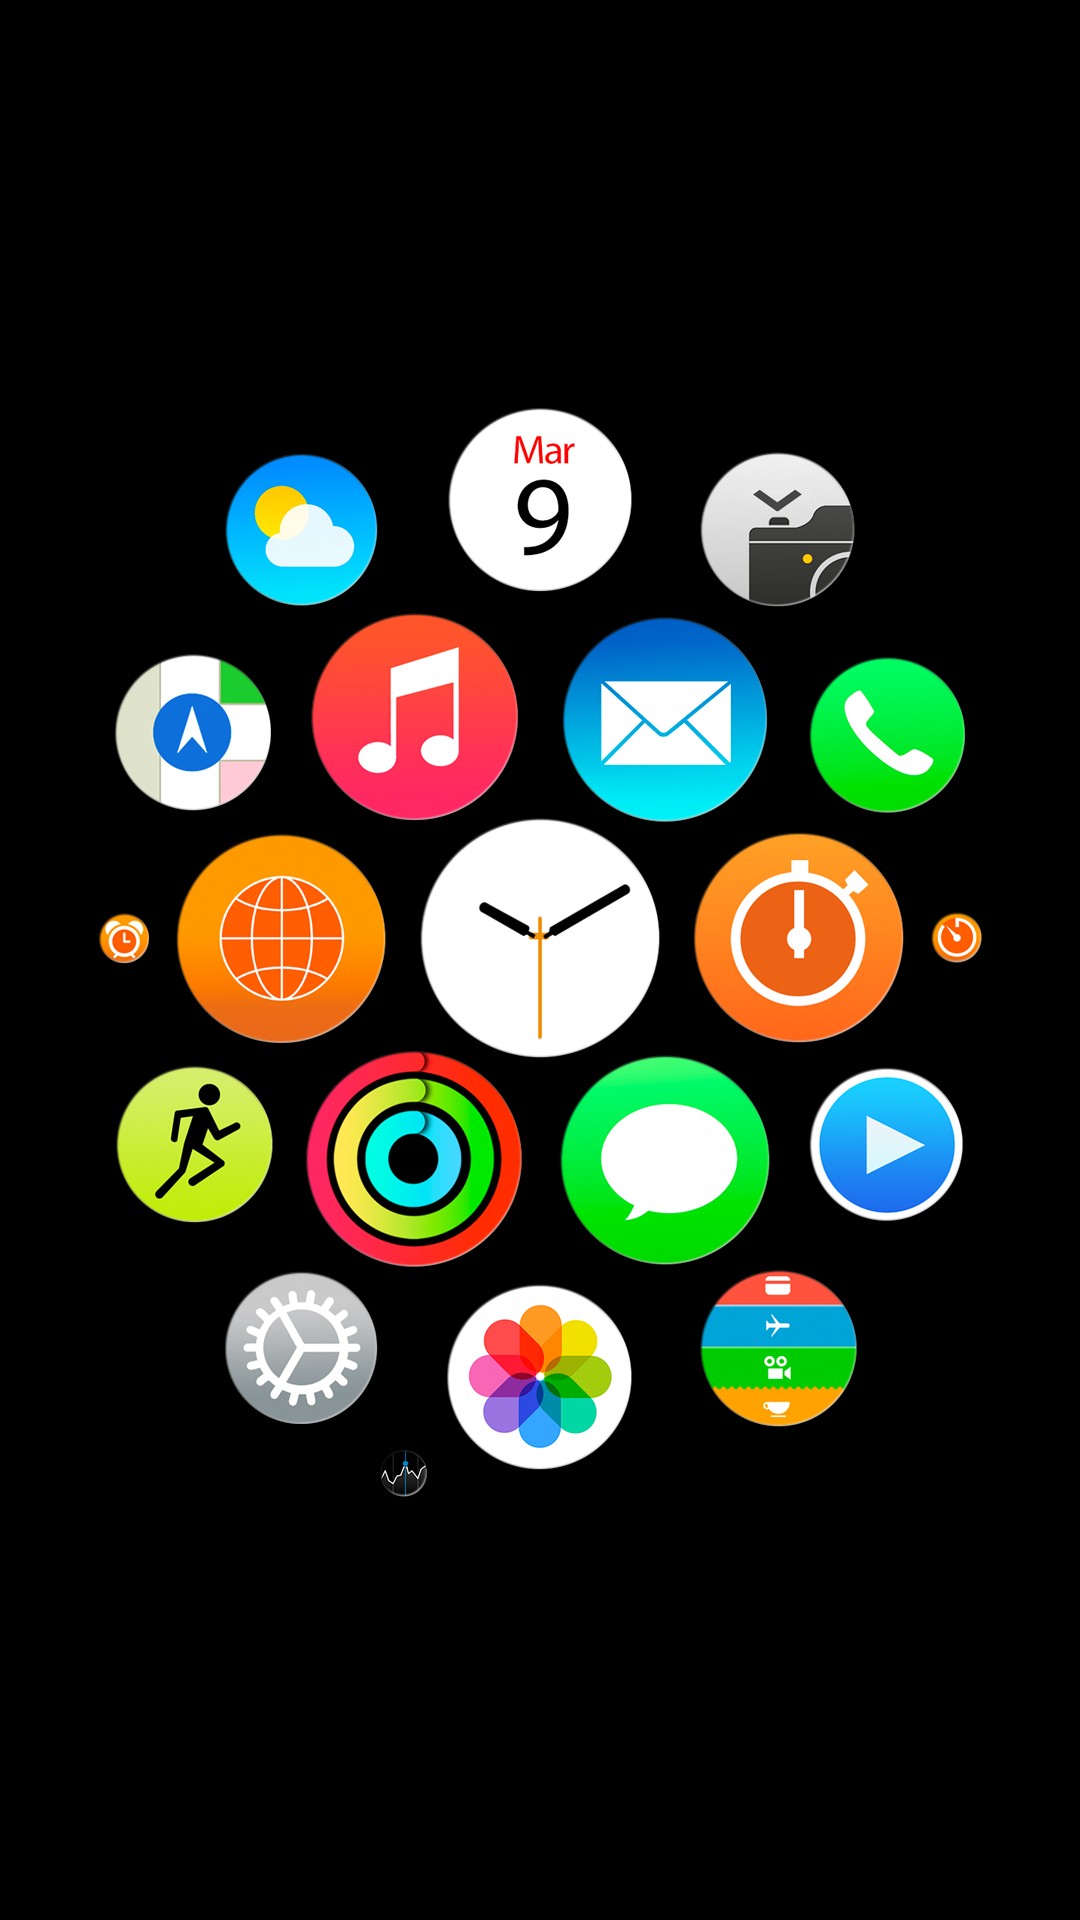 Download Apple Watch Inspired Wallpapers For Iphone Ipad And Mac